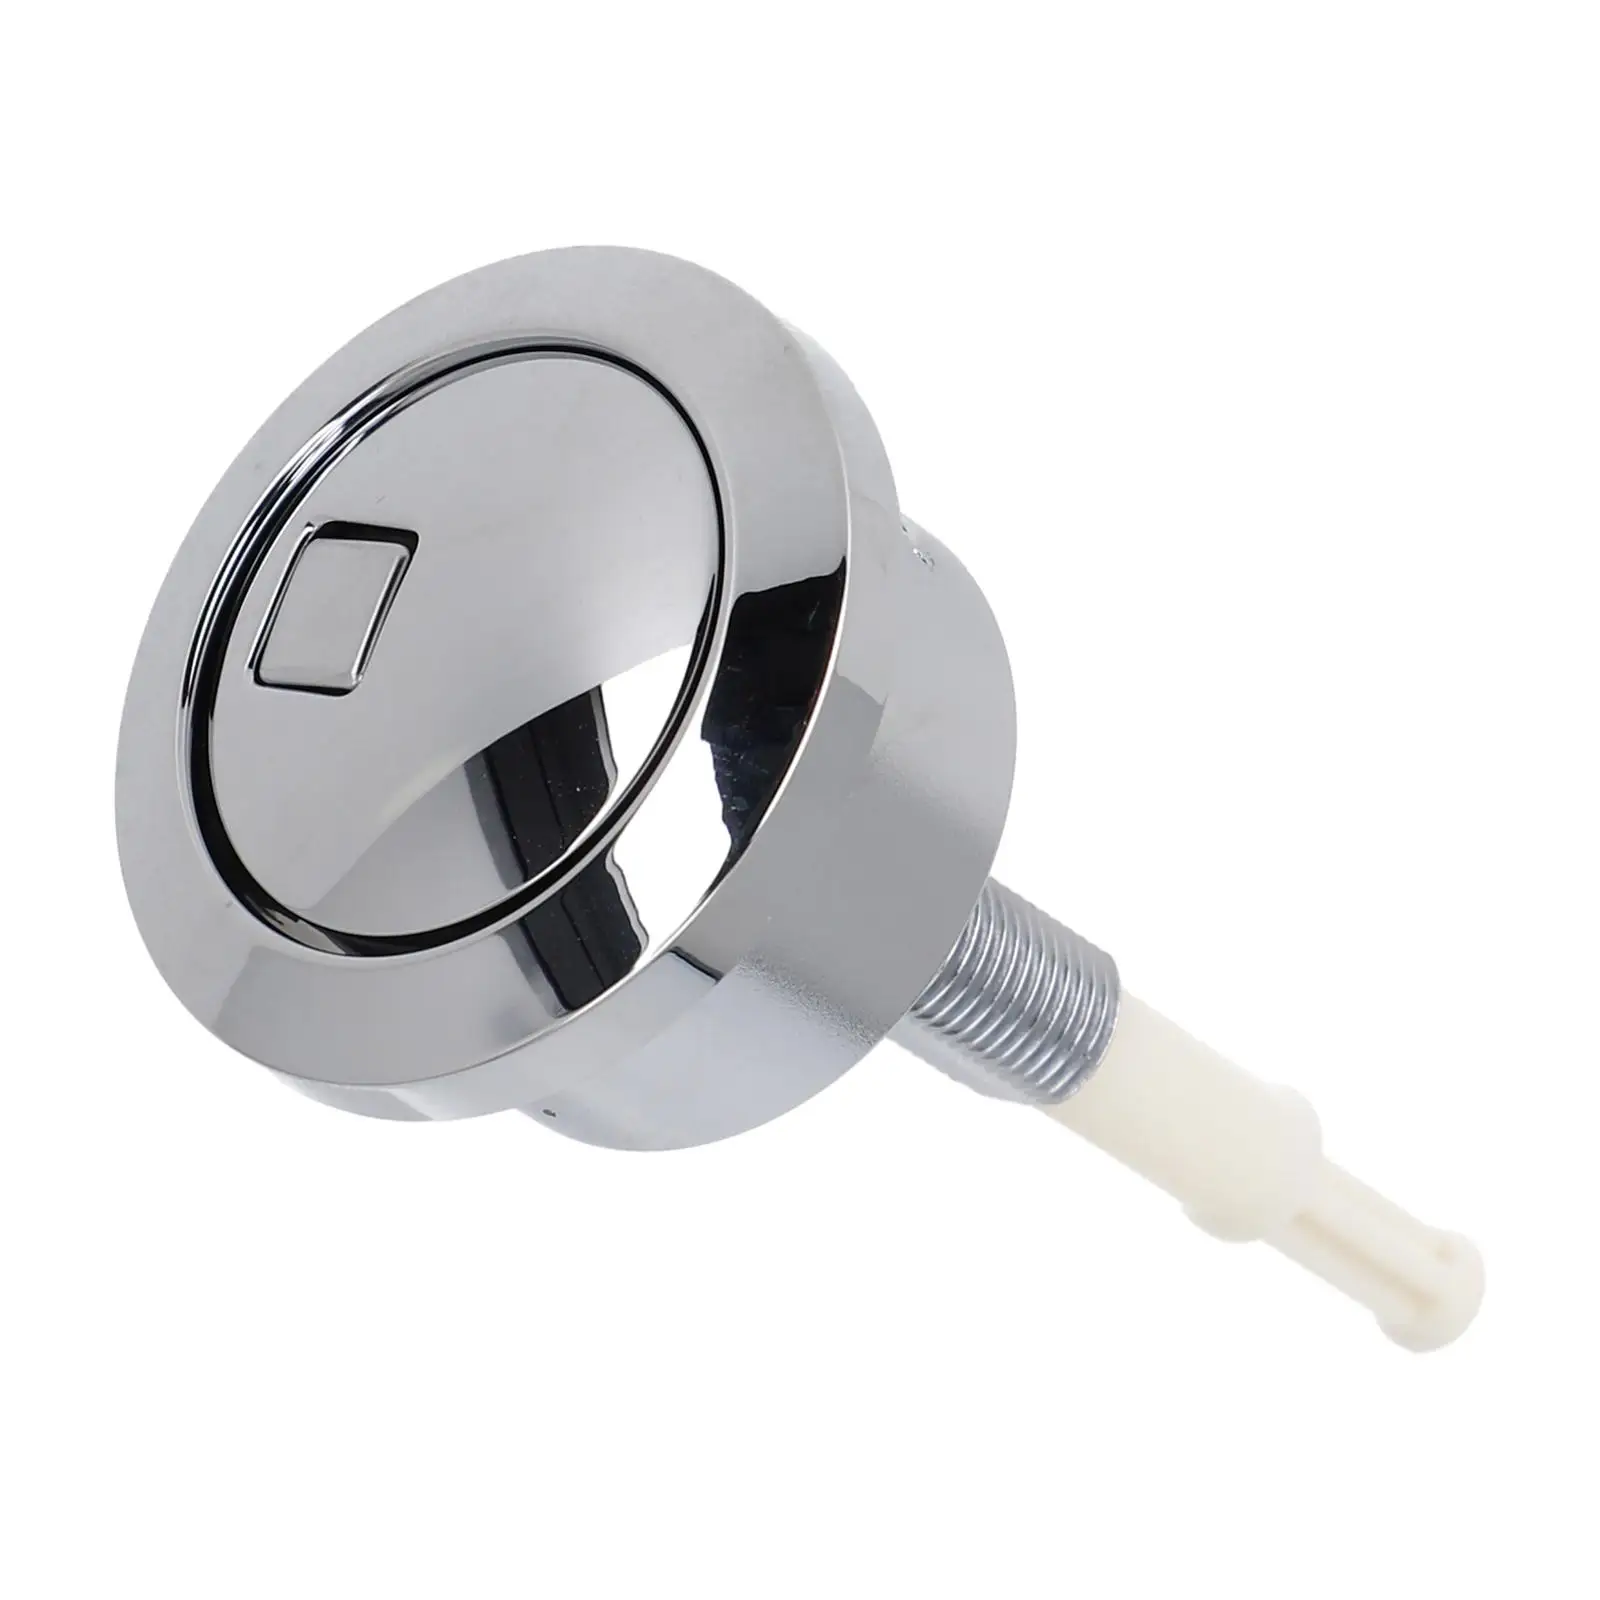 

Toilet Tank Button For Geberit Type 280 Replacement Dual Actuation Push Button 274.006. KG. 1 Bathroom Cistern Accessories